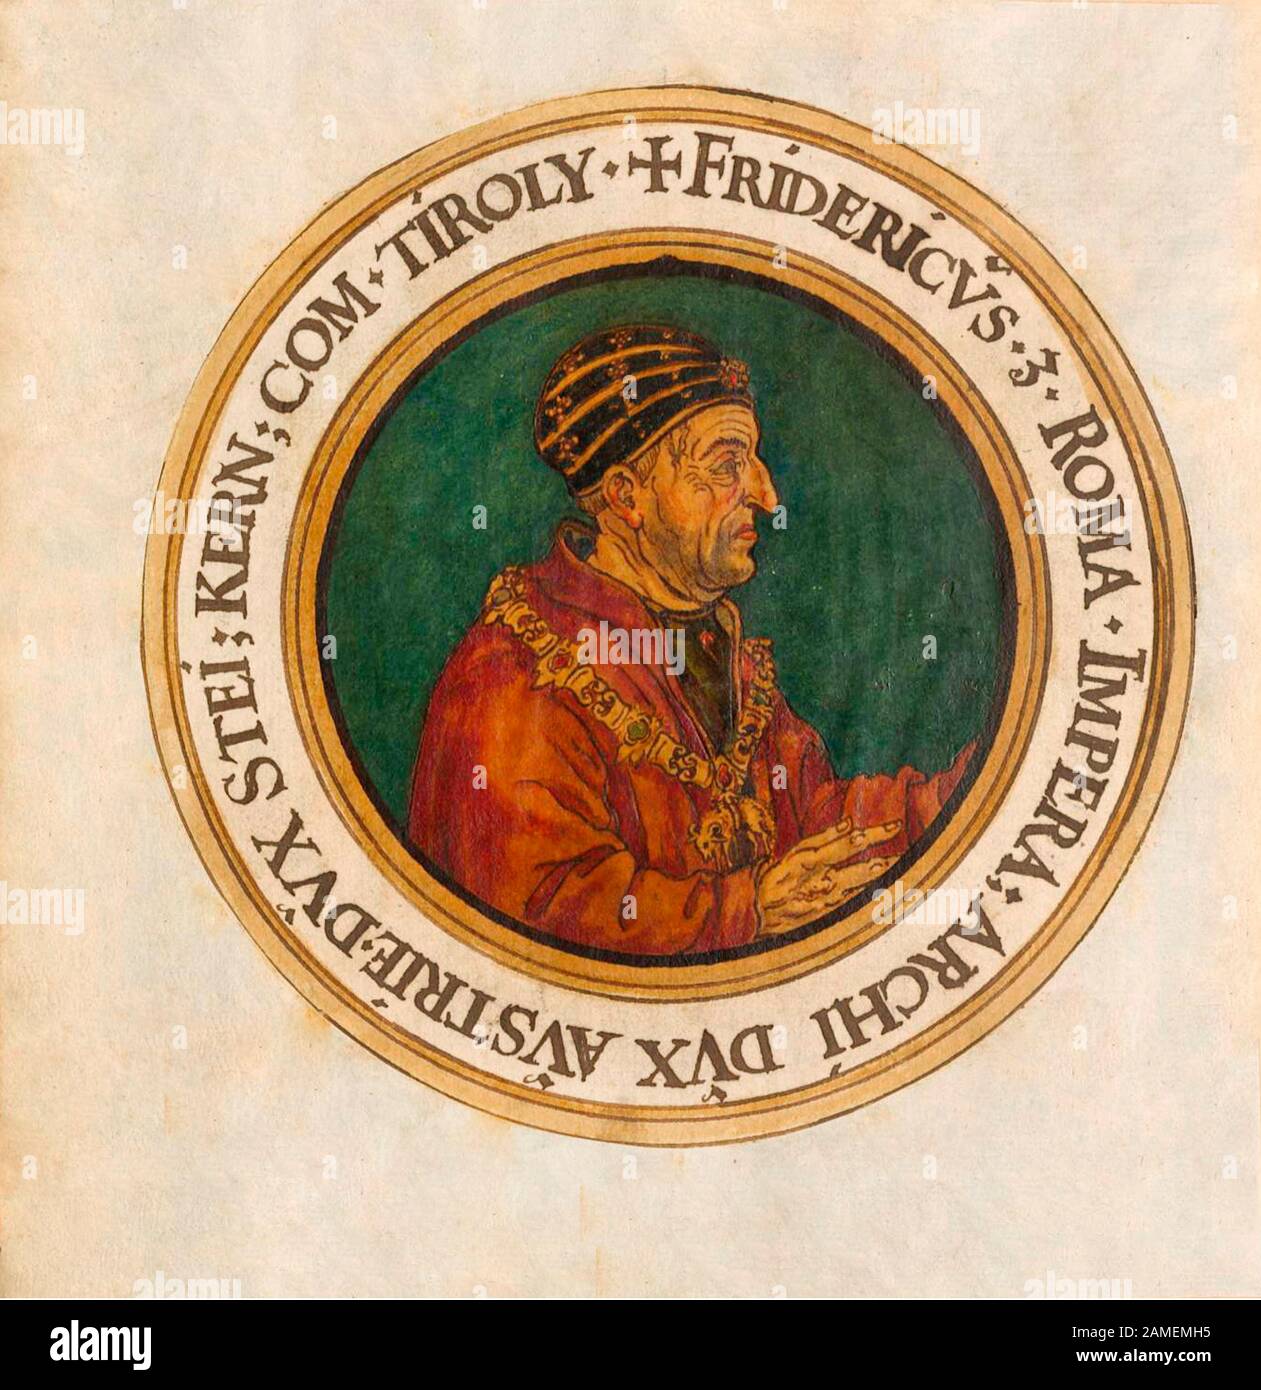 Frederick III (1415 – 1493) was Holy Roman Emperor from 1452 until his death. He was the first emperor of the House of Habsburg, and the fourth member Stock Photo